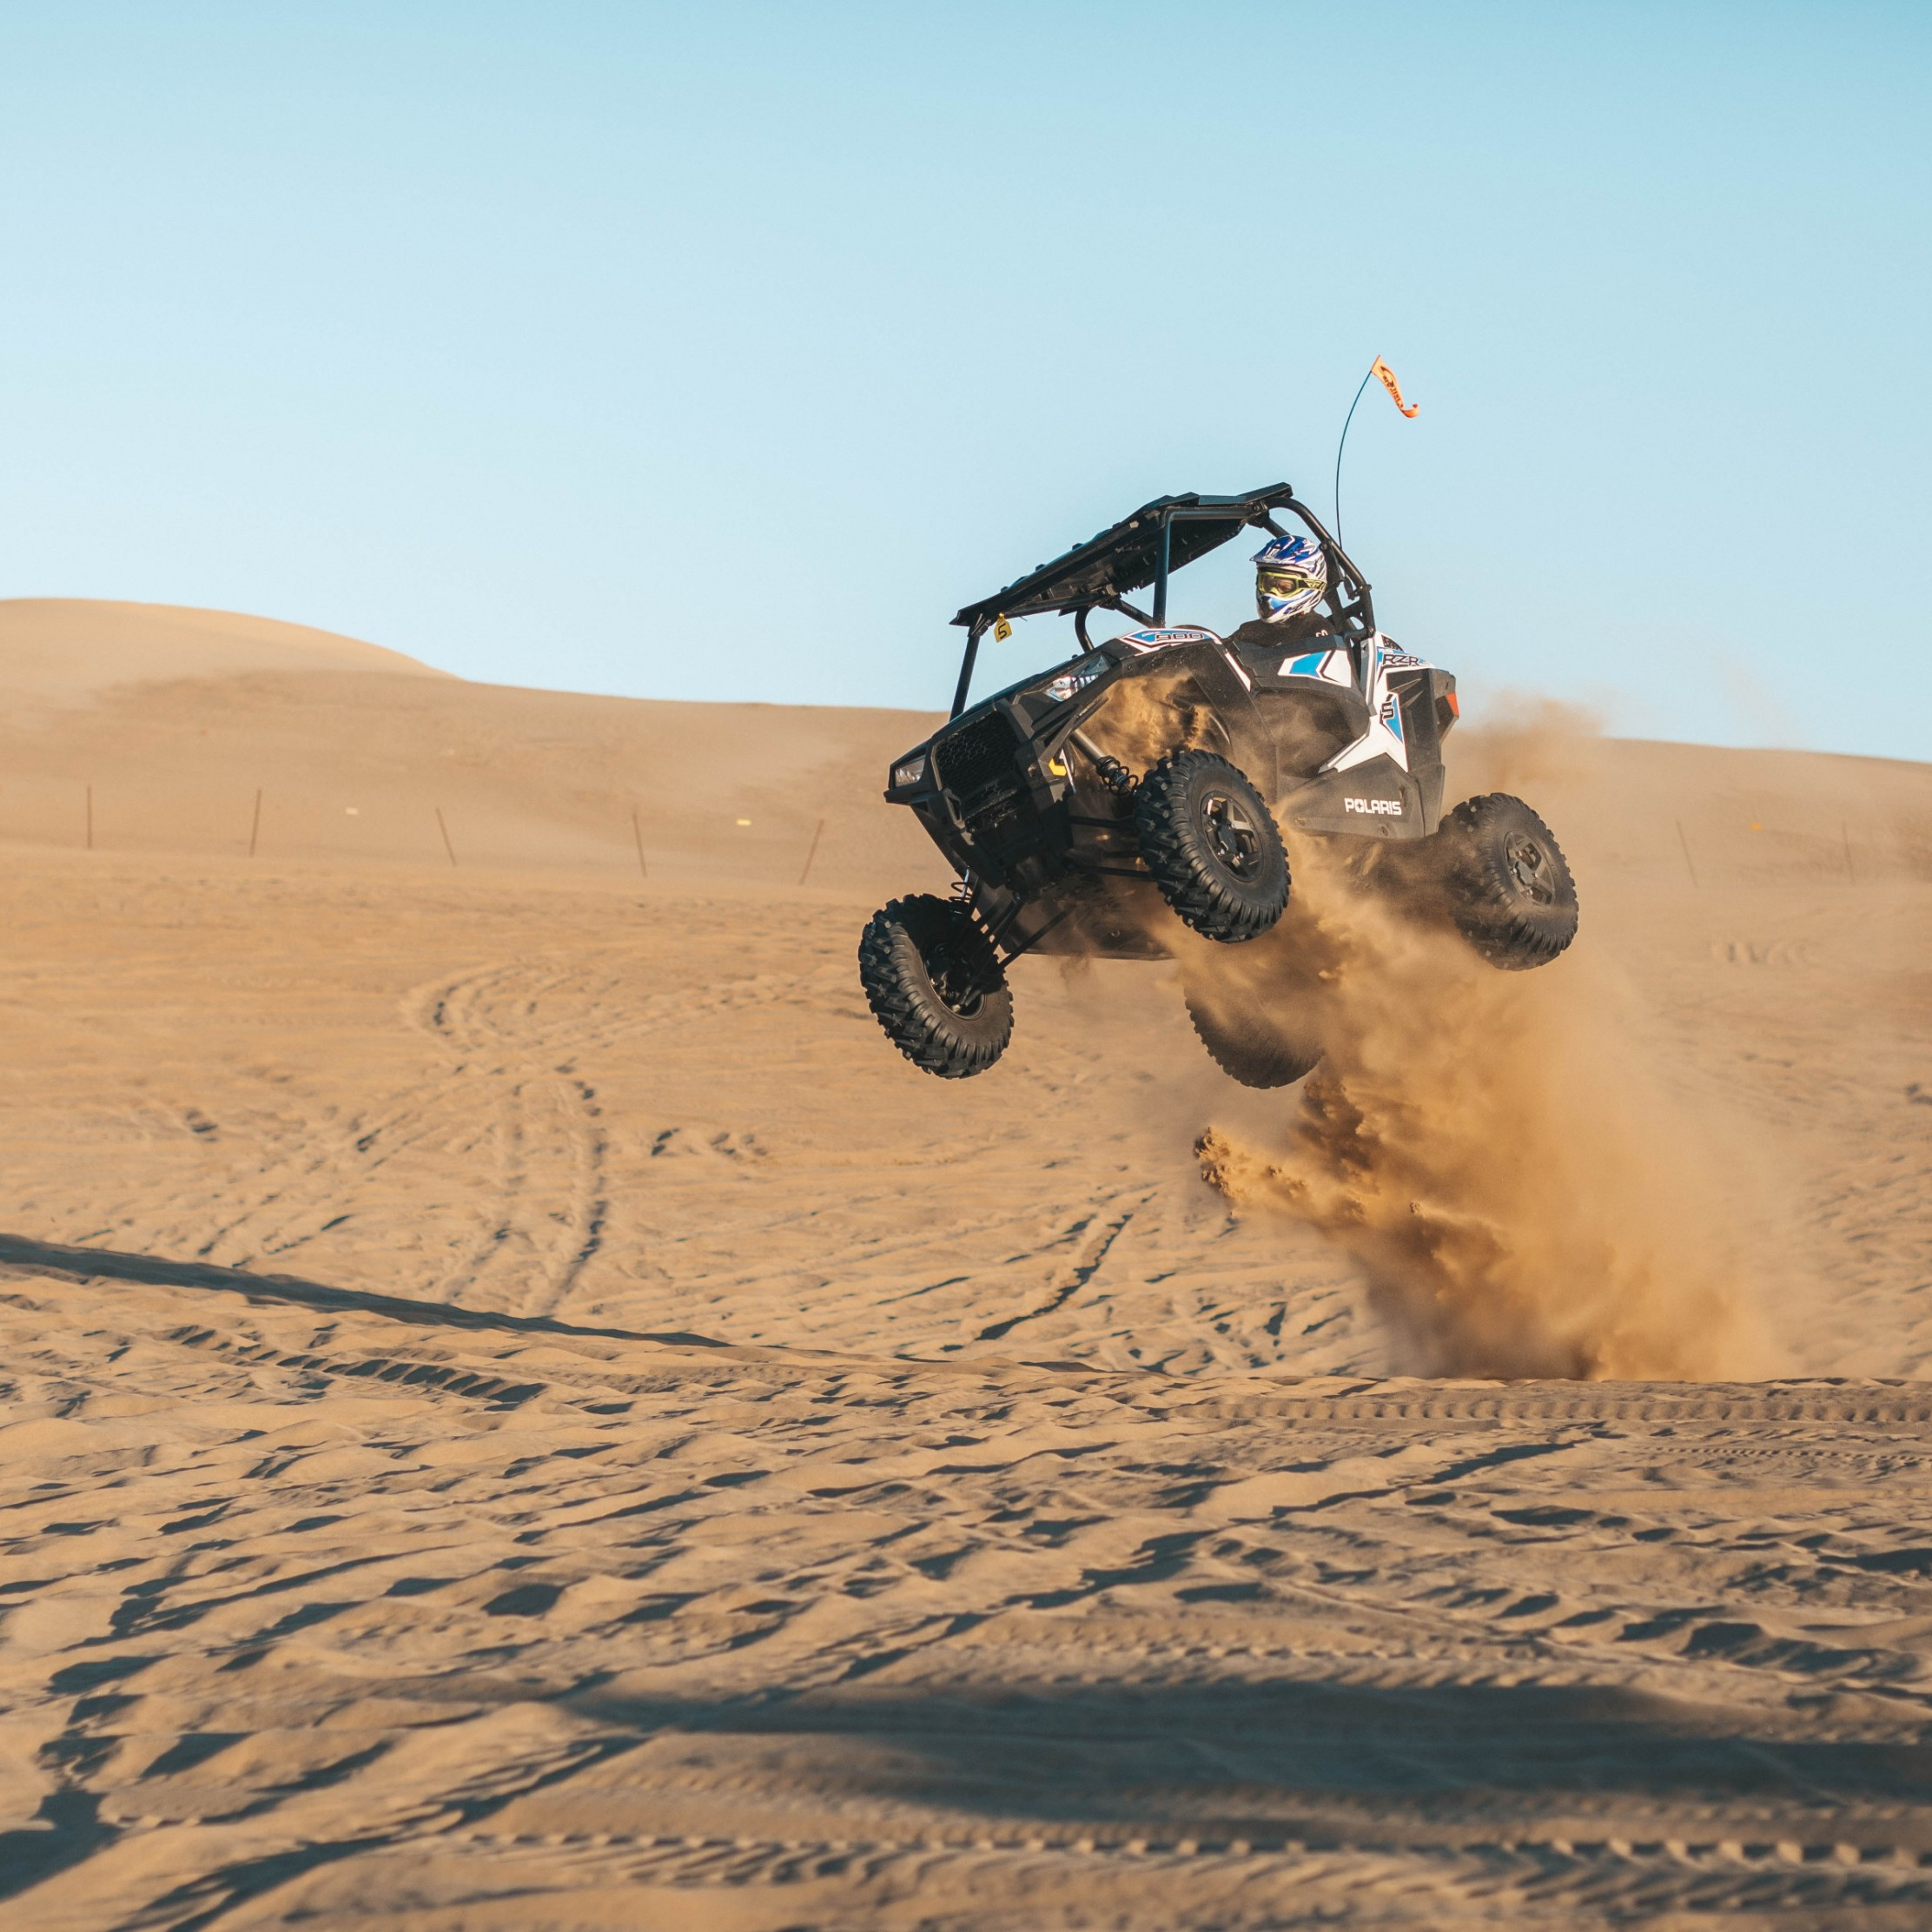 With ATV on the the sand dunes wallpaper 2224x2224